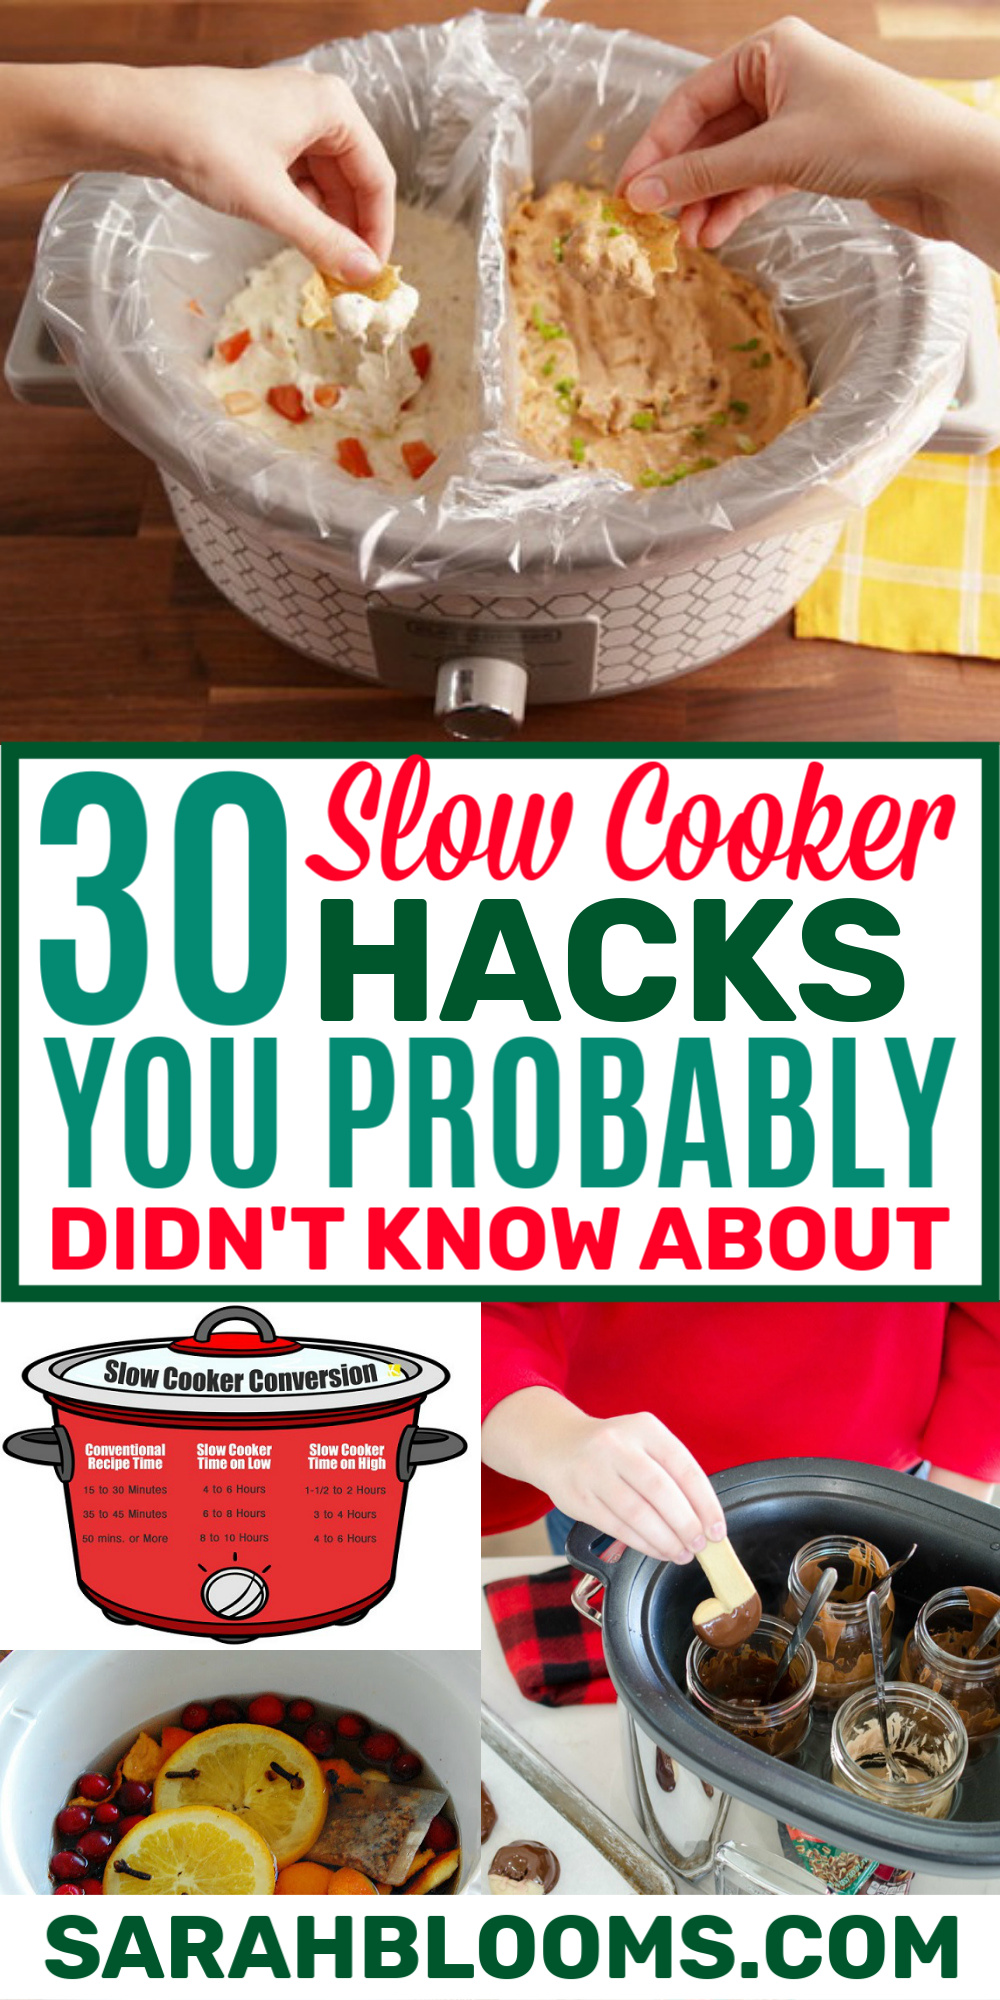 Make the most of your slow cooker with these Must-Know Slow Cooker Tips you'll wish you knew sooner! #slowcooker #slowcookerhacks #slowcookertips #kitchenhacks #kitchentips #cookingtips